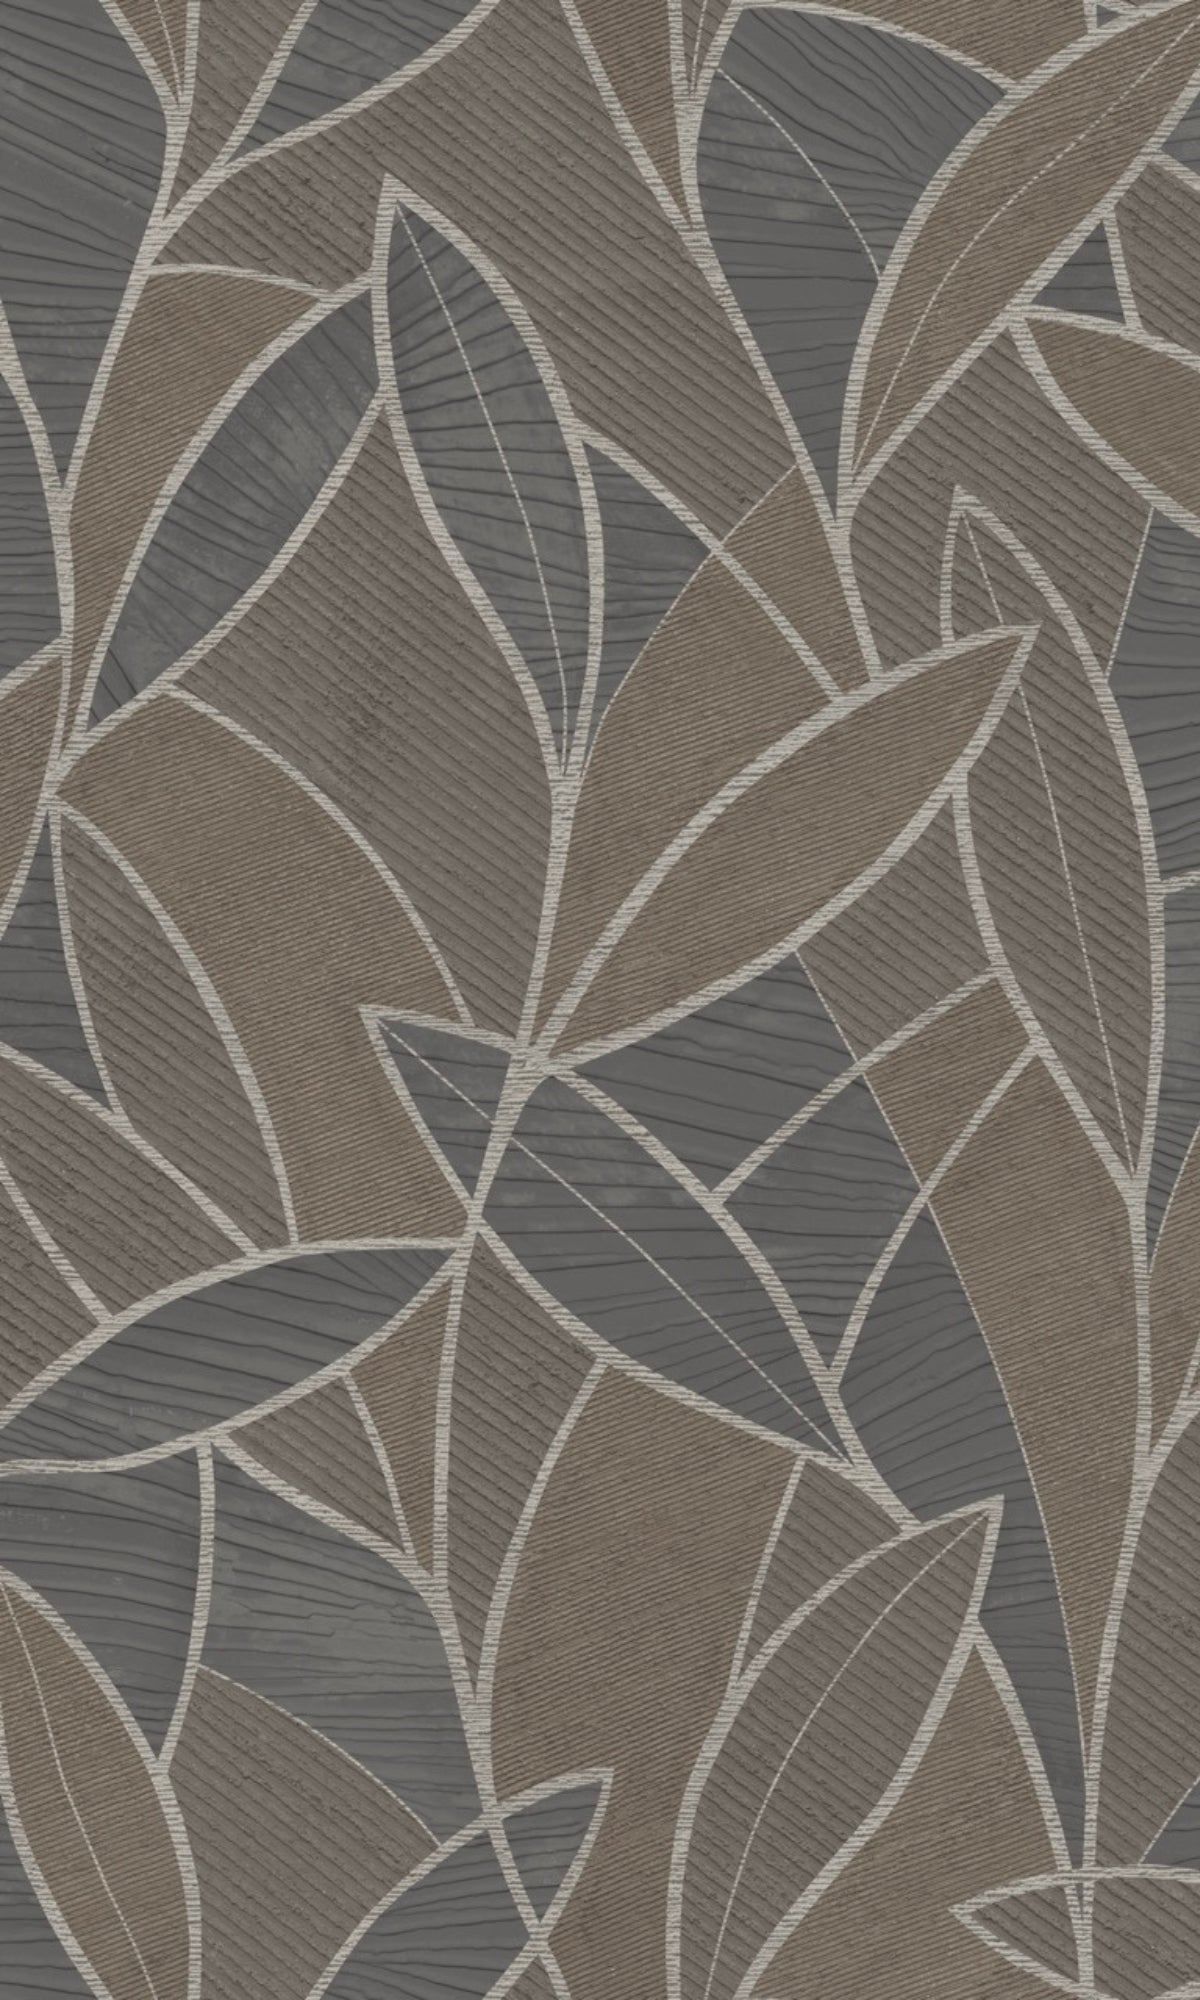 Graphite Leaf Motif With Outlines Tropical Wallpaper R9037